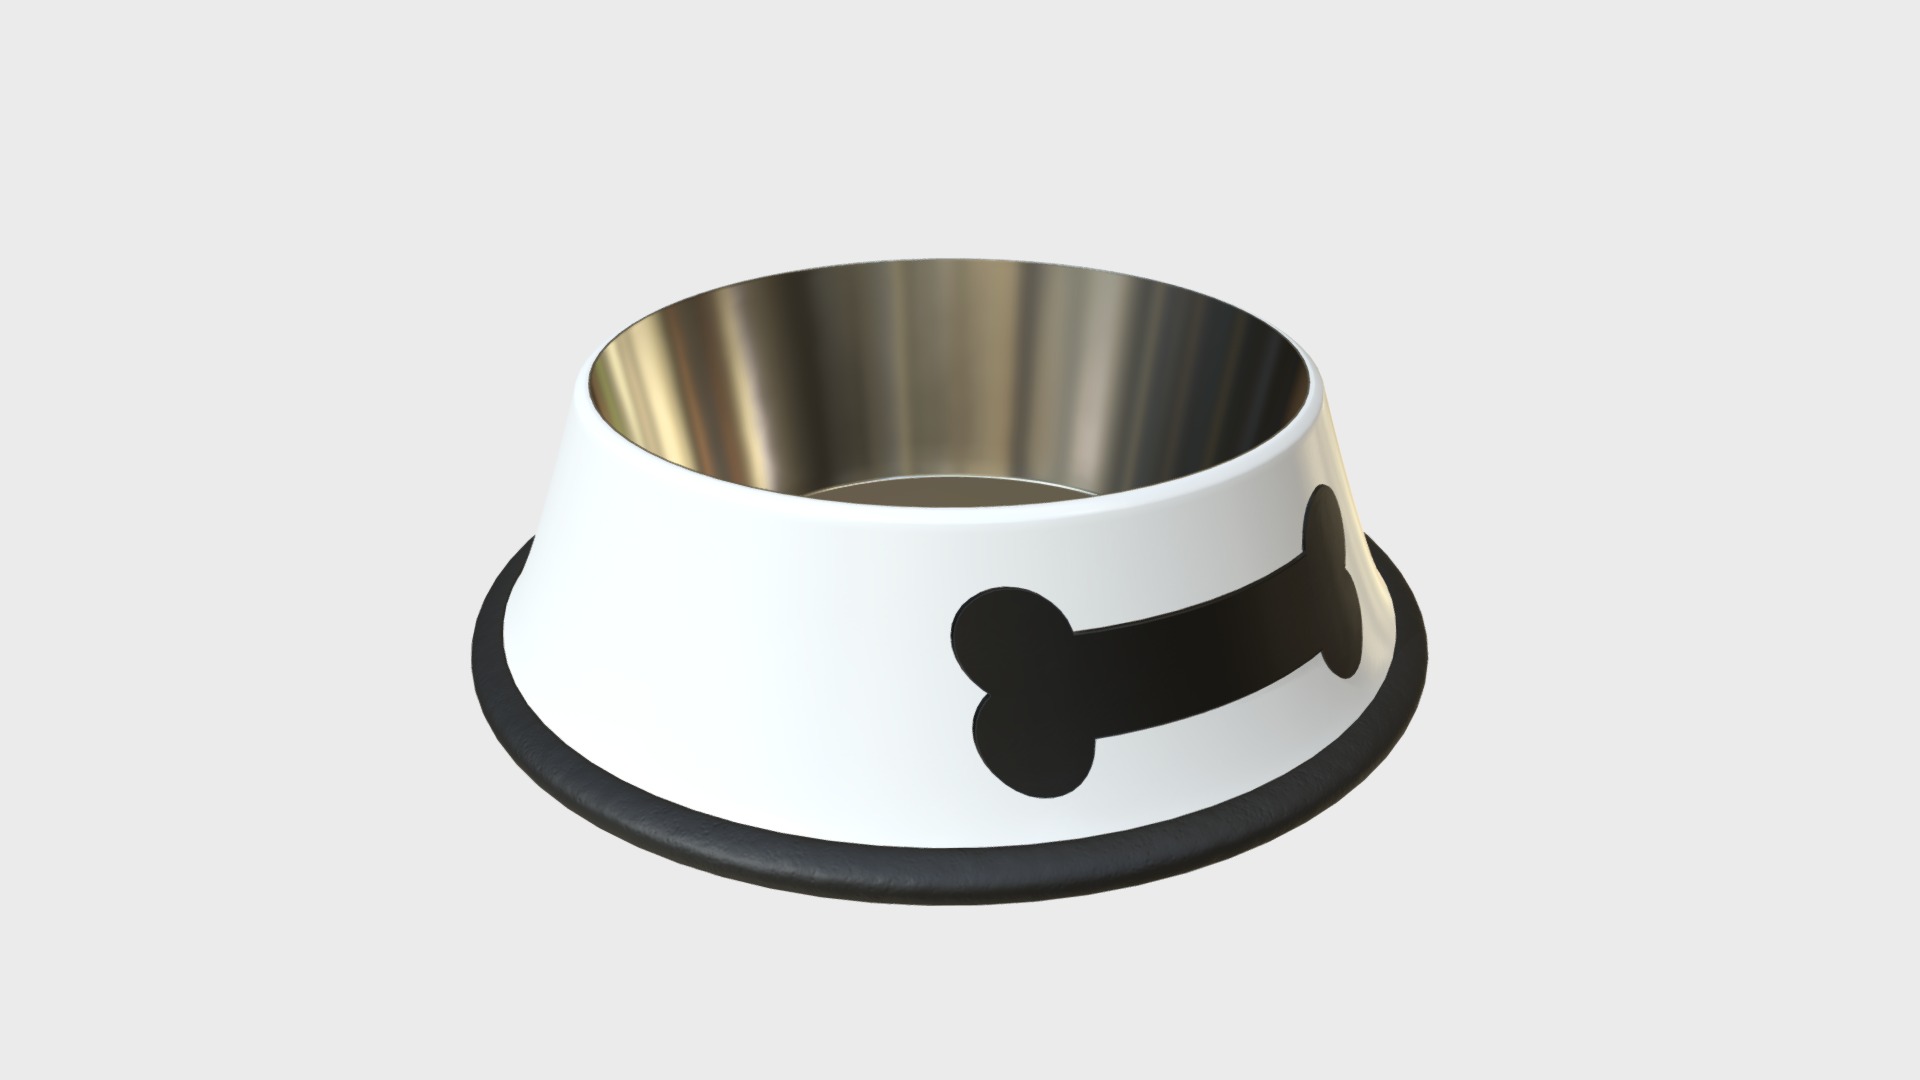 3D model Dog bowl 1 - This is a 3D model of the Dog bowl 1. The 3D model is about a silver and black metal bowl.